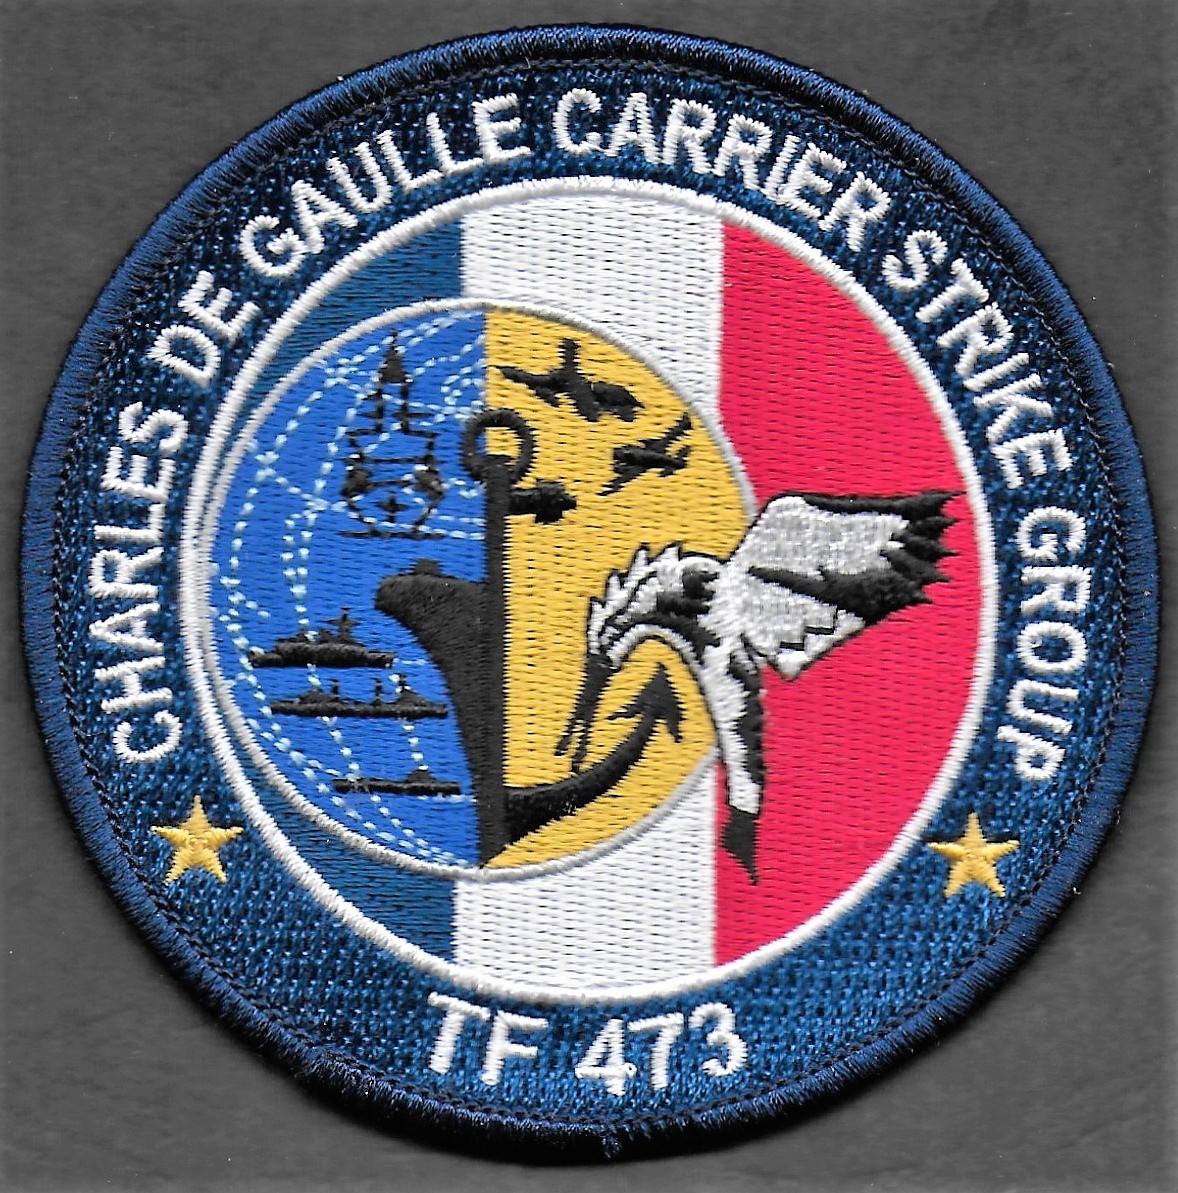 PA Charles de Gaulle CDG - Carrier stike Group TF473 - mod 1